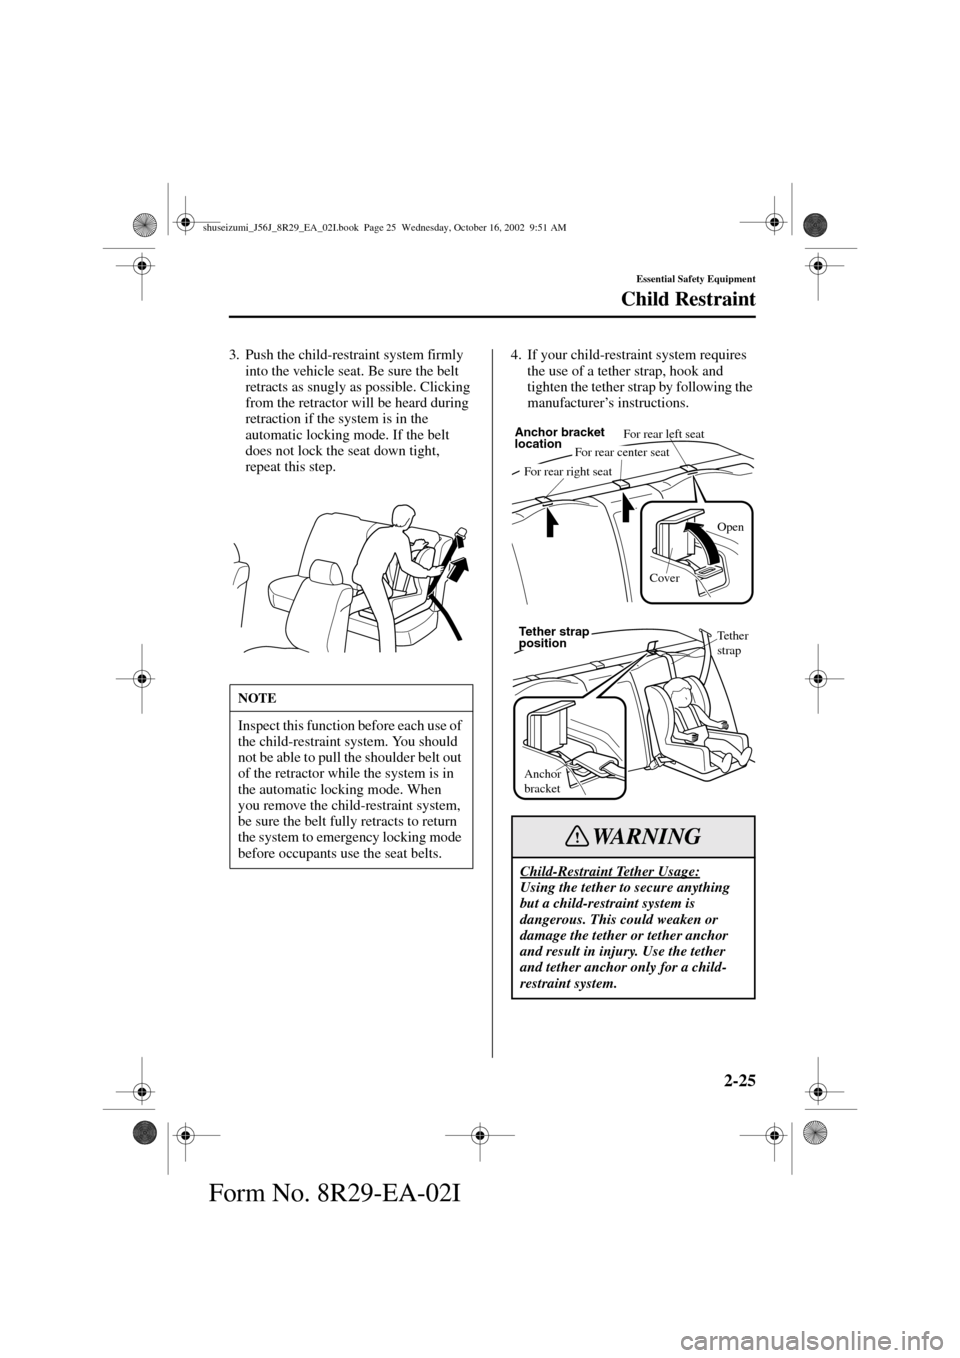 MAZDA MODEL 6 2003  Owners Manual (in English) 2-25
Essential Safety Equipment
Child Restraint
Form No. 8R29-EA-02I
3. Push the child-restraint system firmly 
into the vehicle seat. Be sure the belt 
retracts as snugly as possible. Clicking 
from 